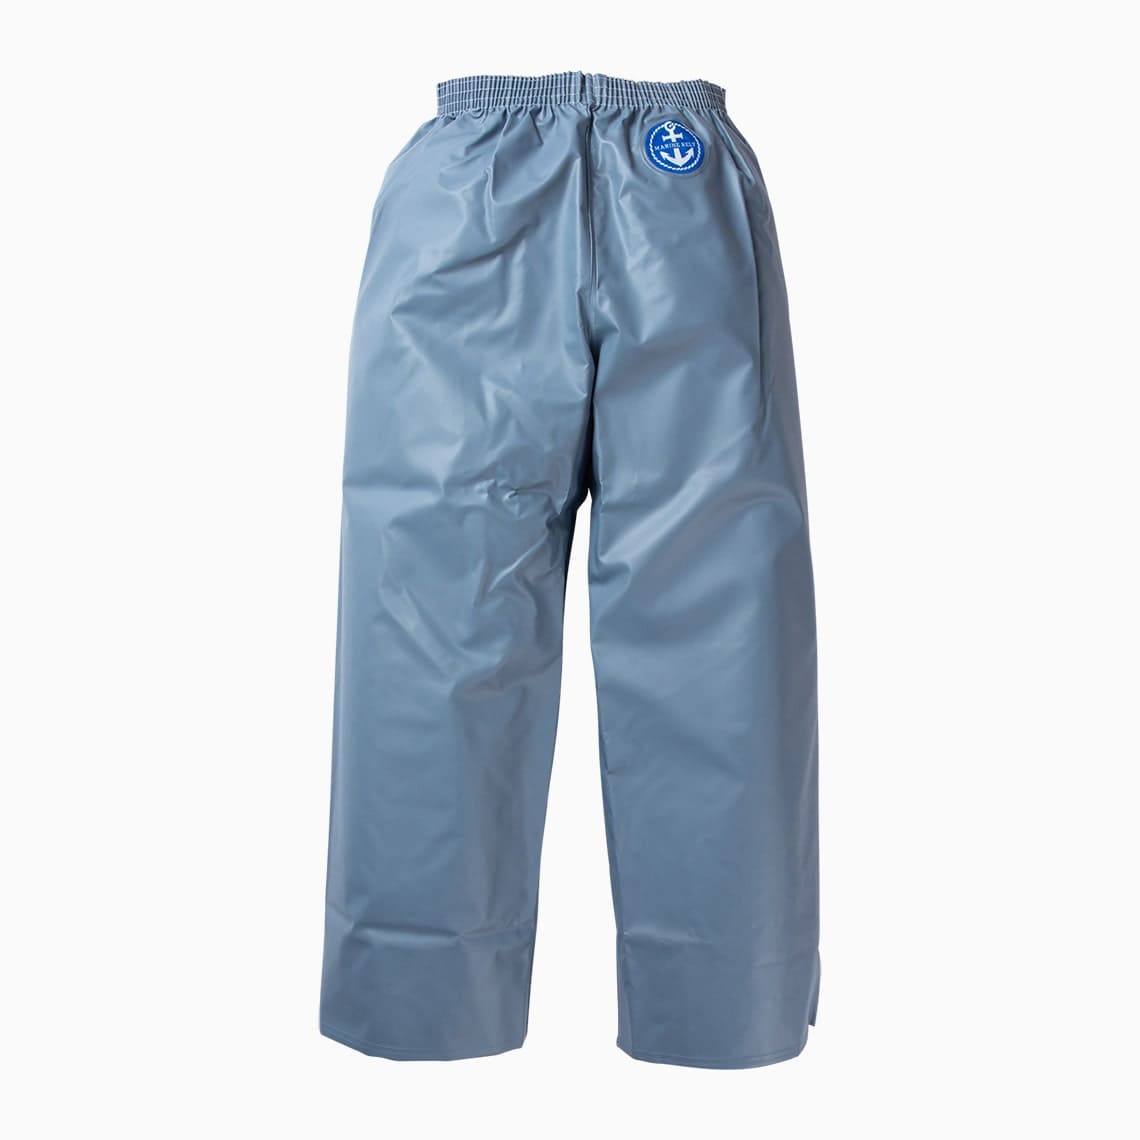 Marine rely pants Grey